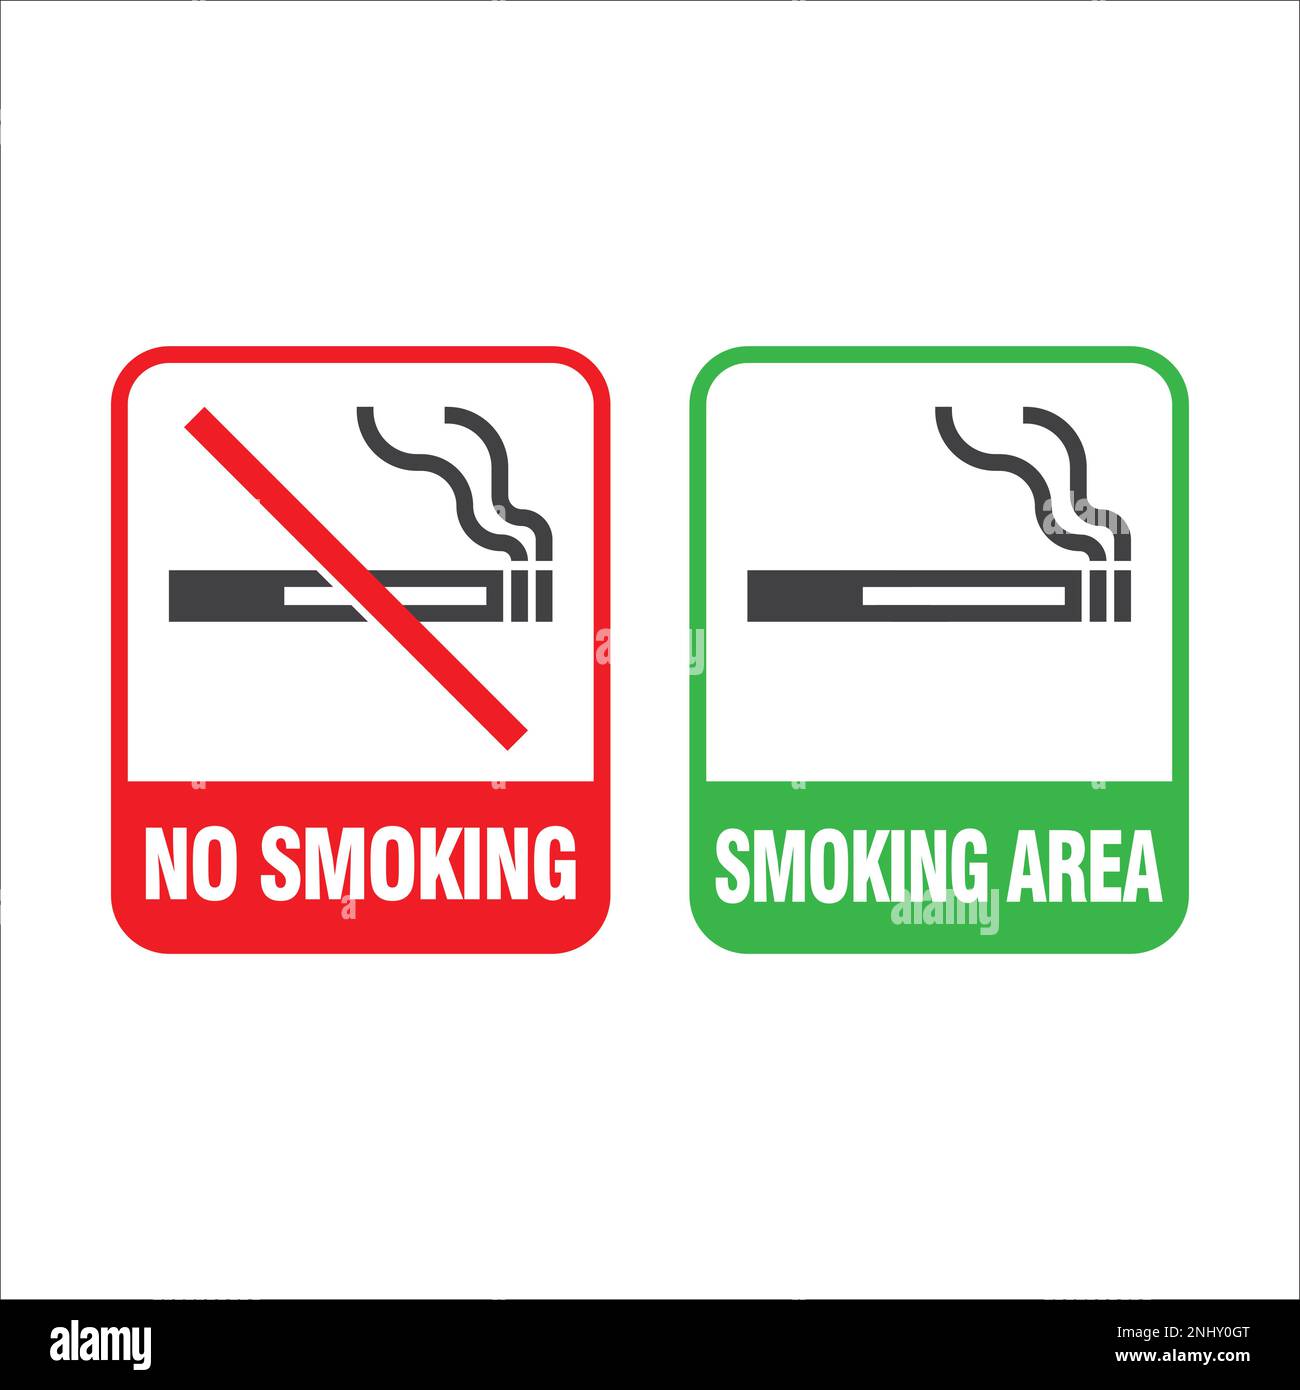 No smoking and Smoking area labels. Smoking design sign element. Vector illustration Stock Vector